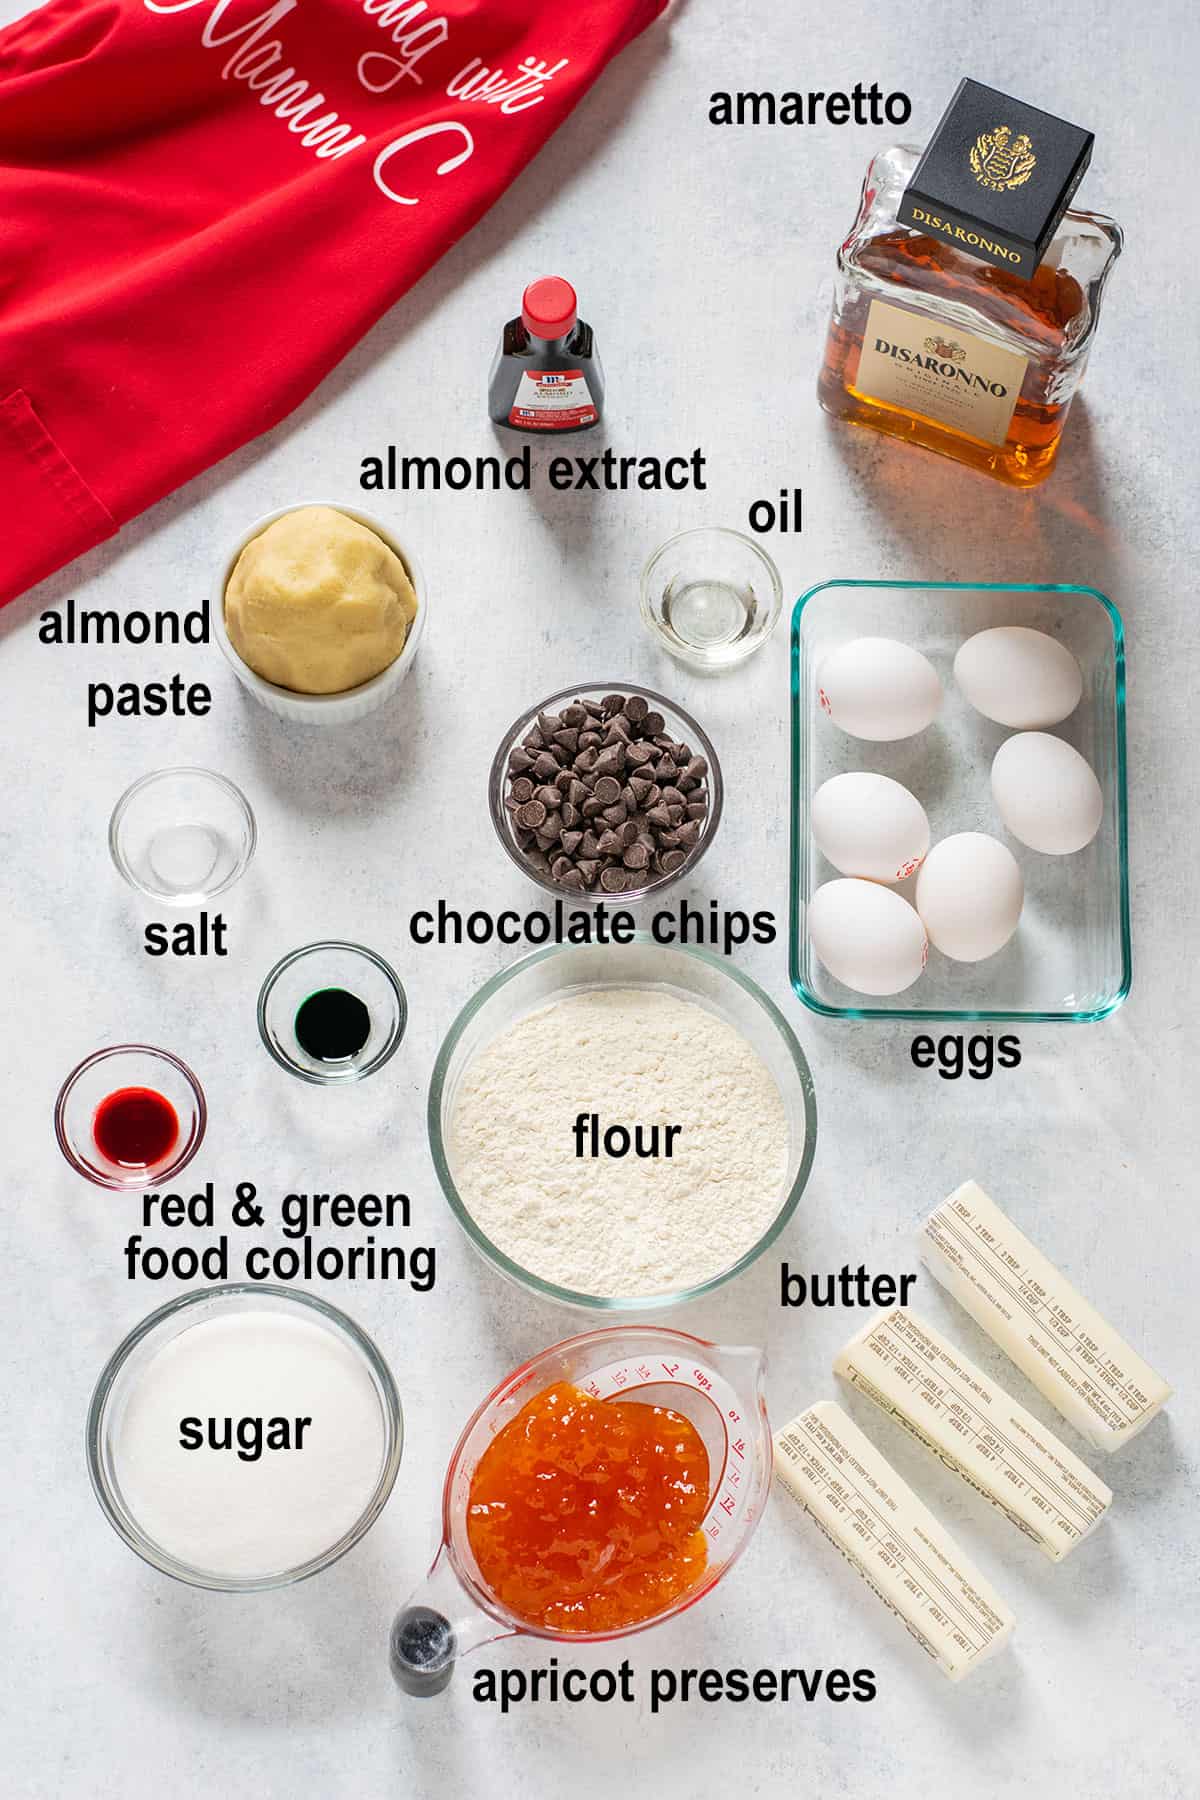 amaretto, almond extract, almond paste, oil, salt, chocolate, eggs, coloring, butter, sugar, preserves